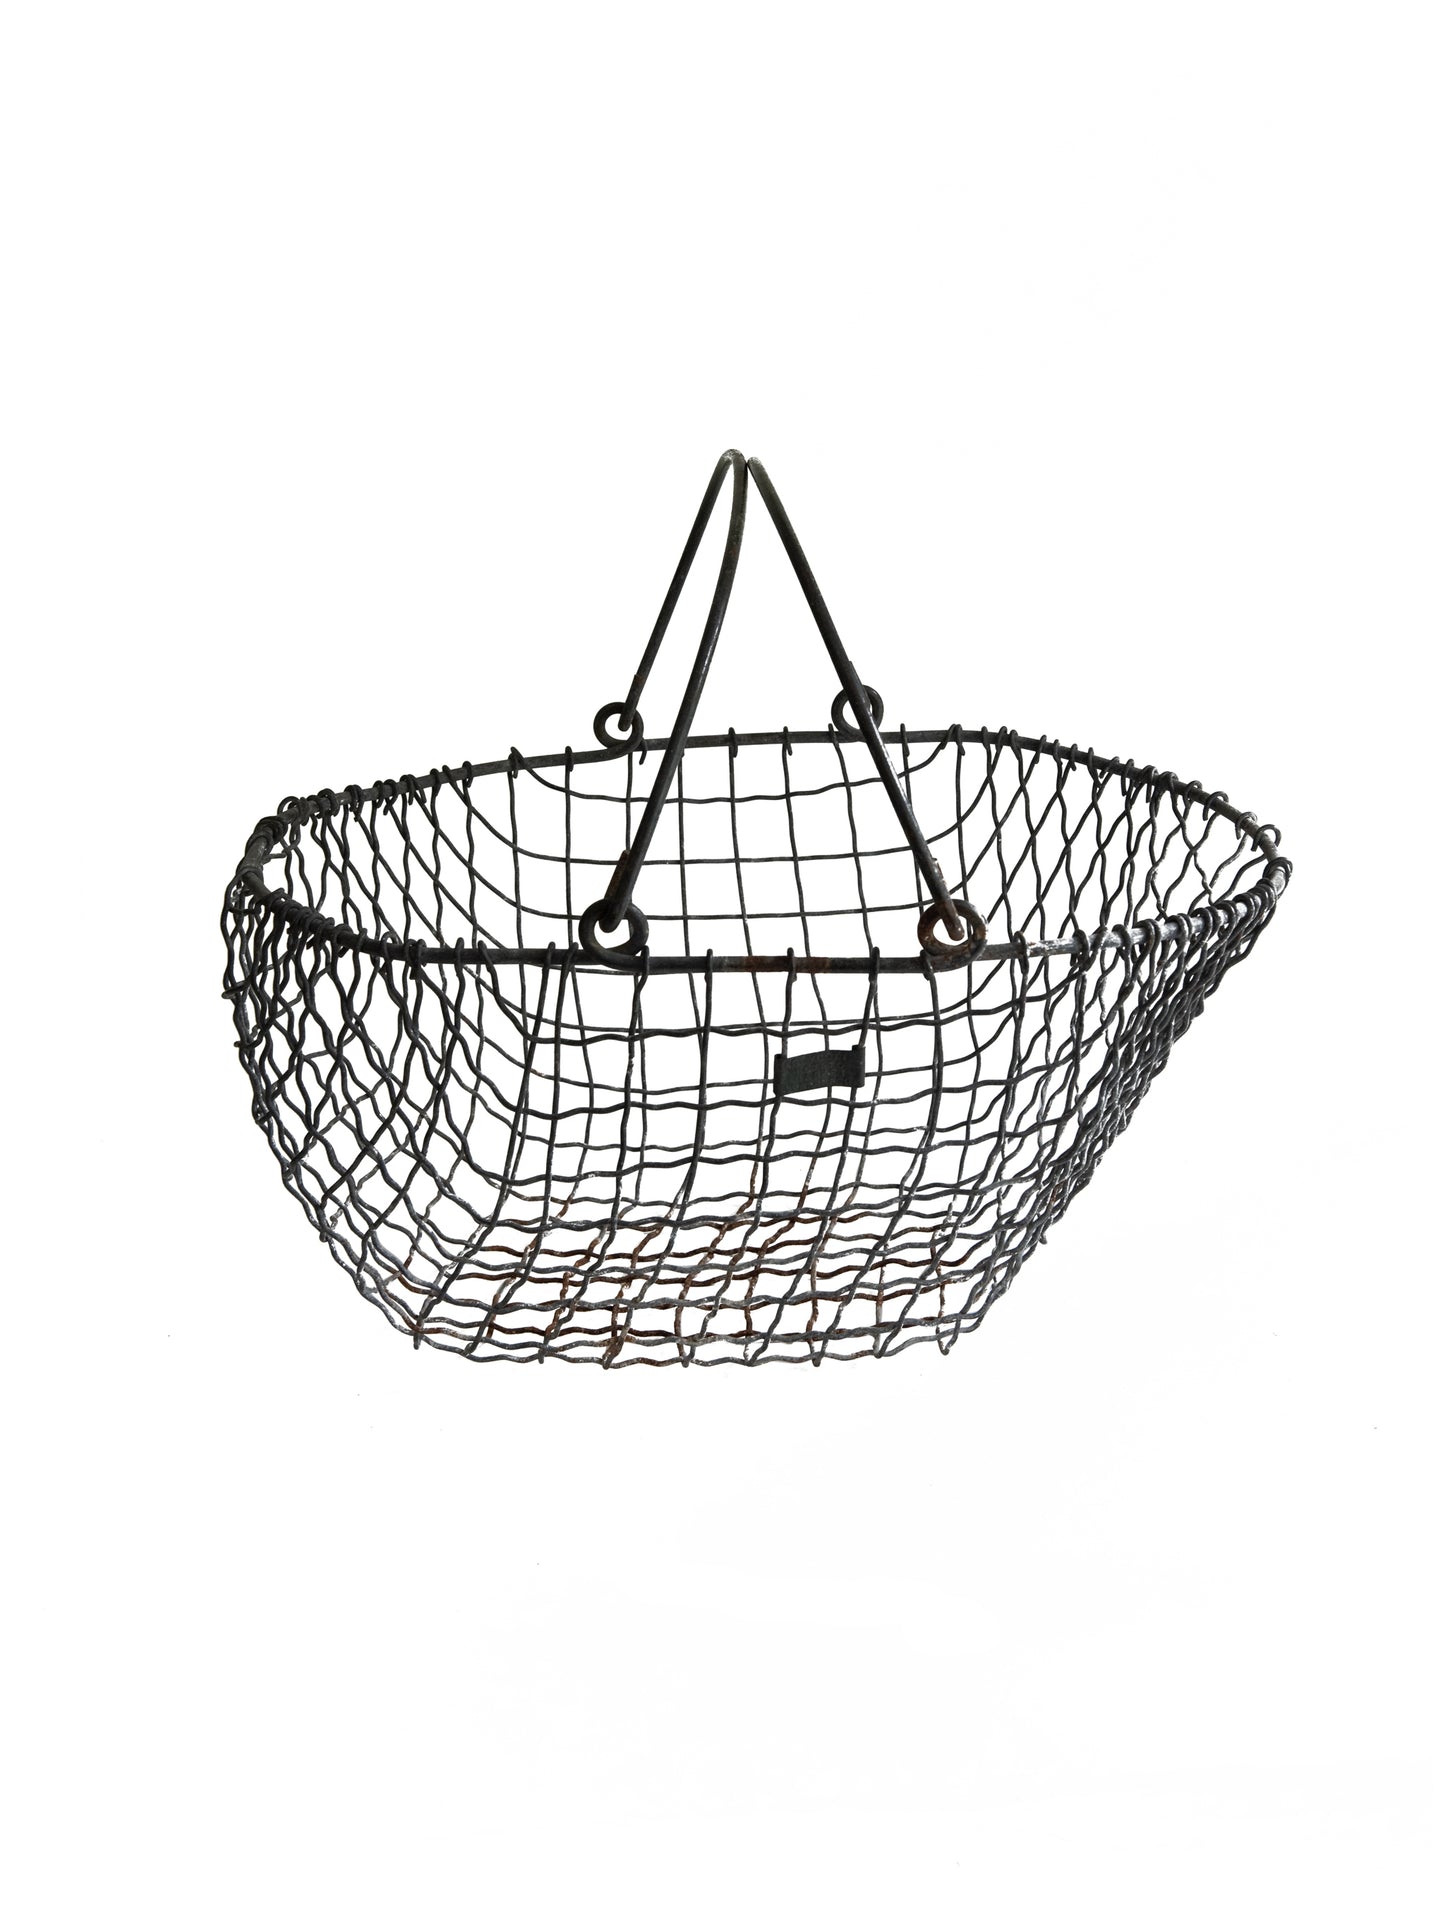 Vintage 1910 French Wire Oyster Basket